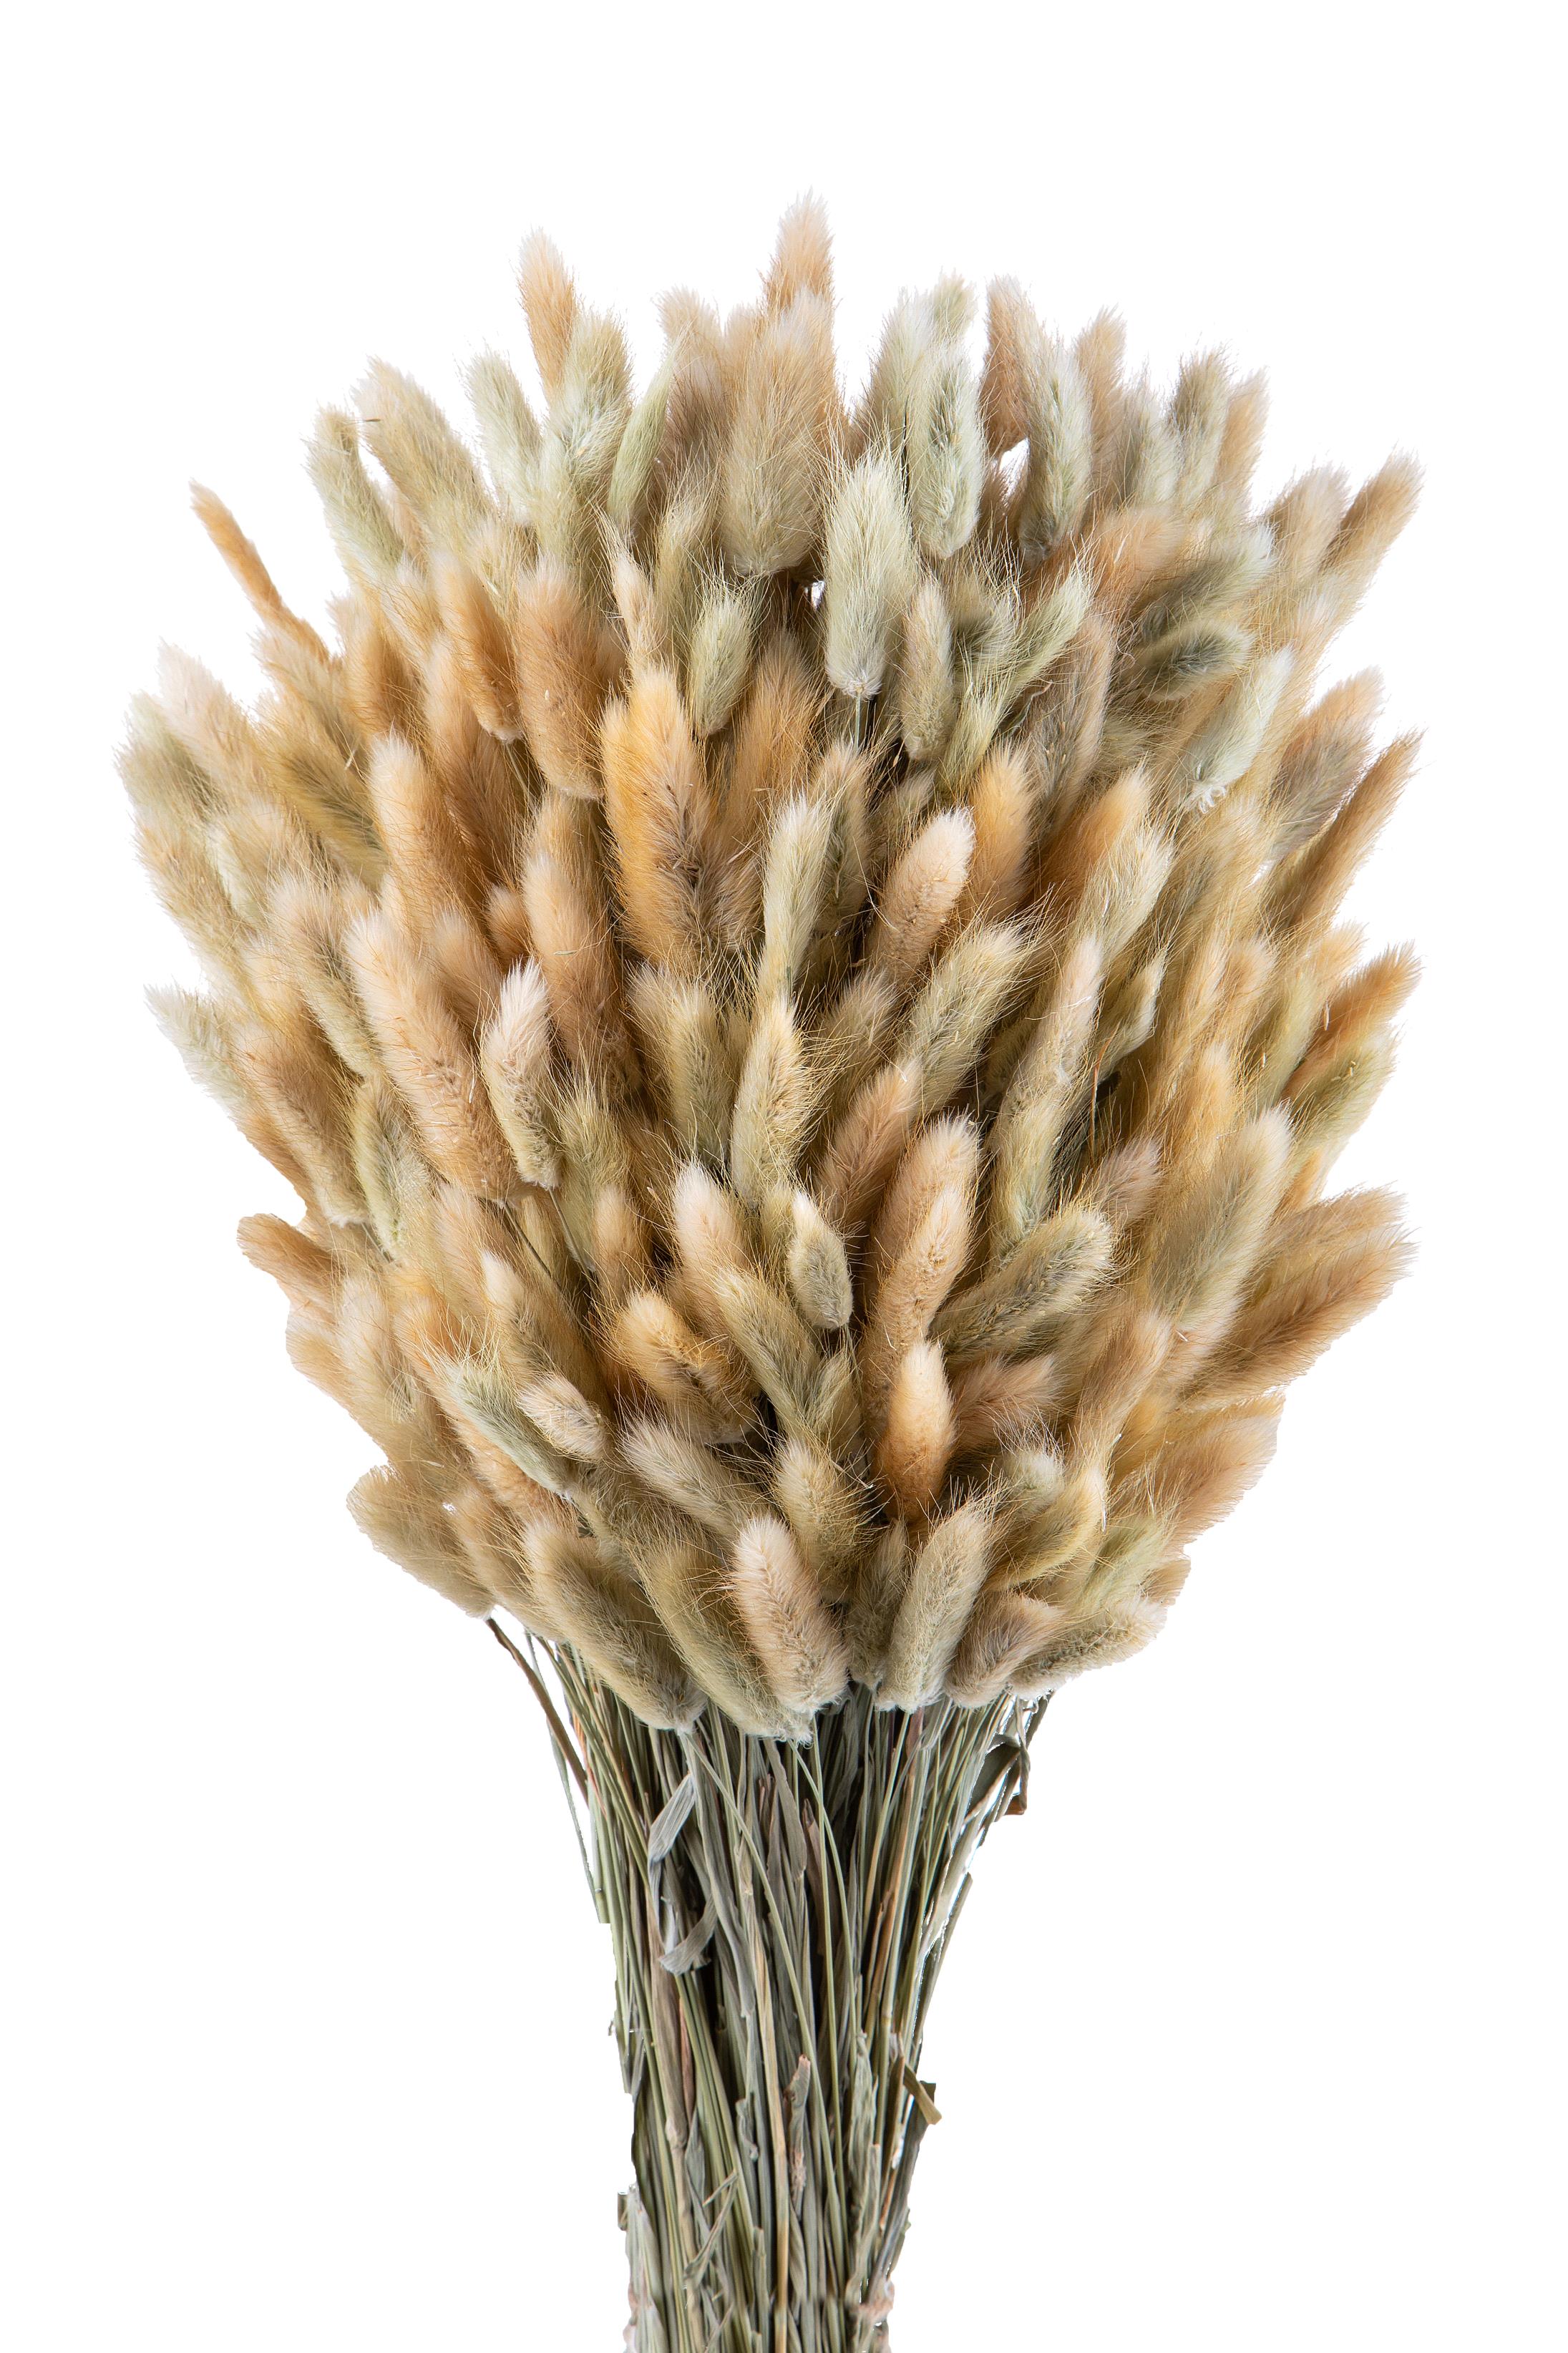 NATURAL PRODUCTS DRIED FLOWERS AND ERBS, NATURAL GRASS, LAGURUS NATURALE A KG IMP.